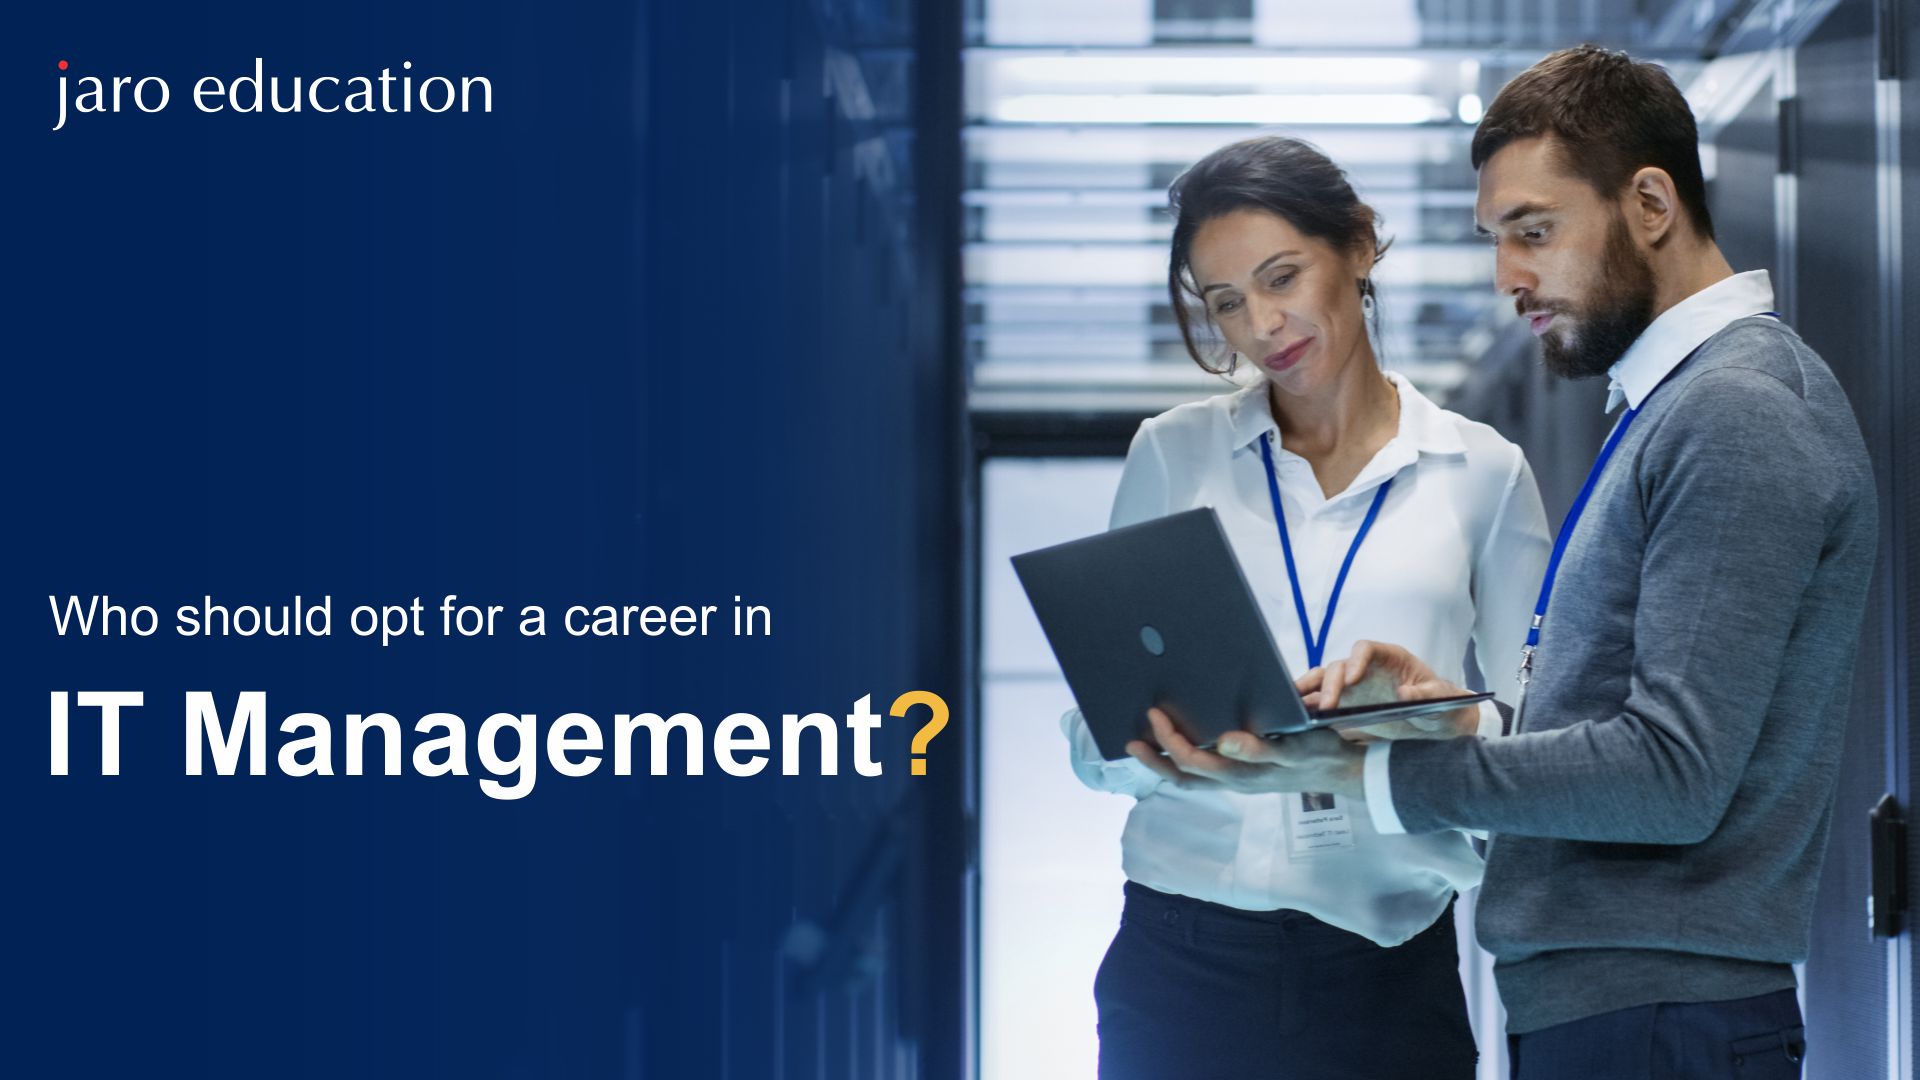 General Management Course for IT Professionals from IIM Kozhikode Jaro